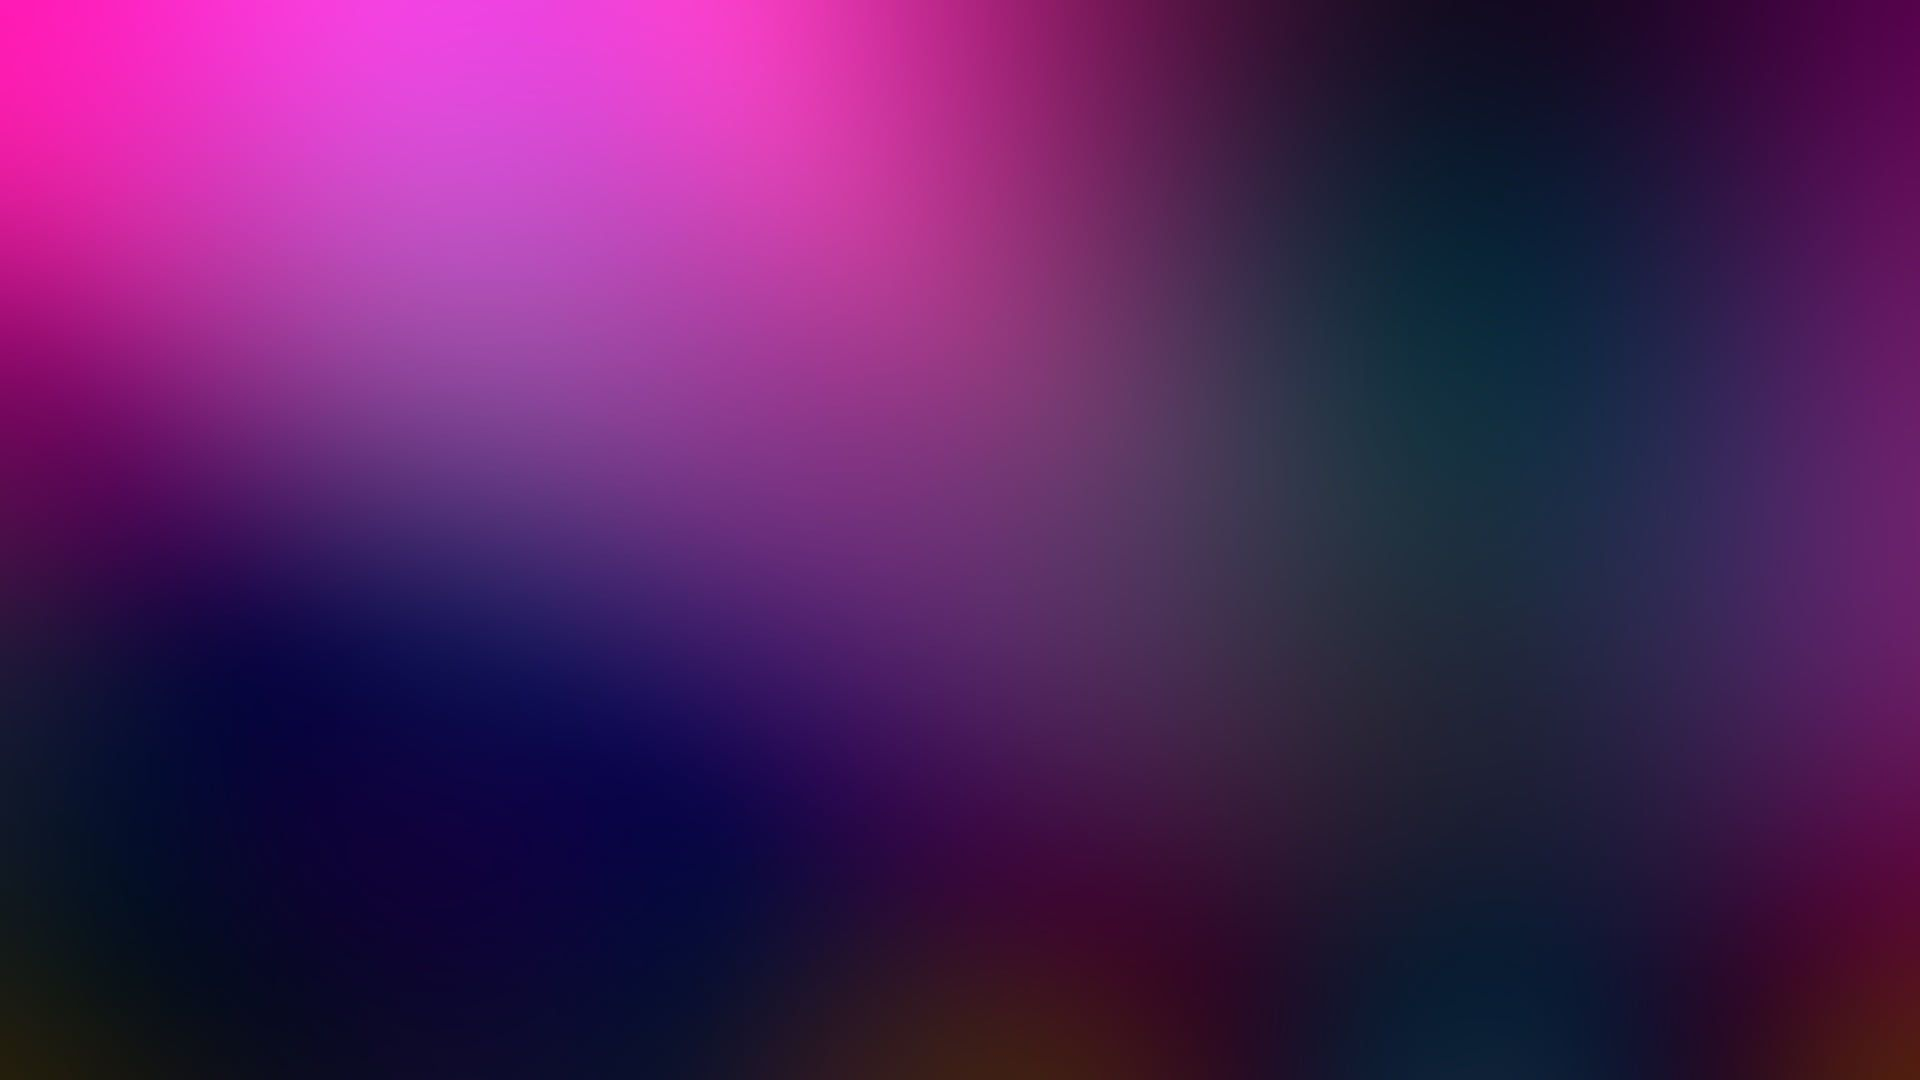 1920x1080 untitled #abstract #colorful warm colors #blurred soft gradient #1080P # wallpaper #hdwallpaper #desktop | Warm colors, Color blur, Graphic wallpaper